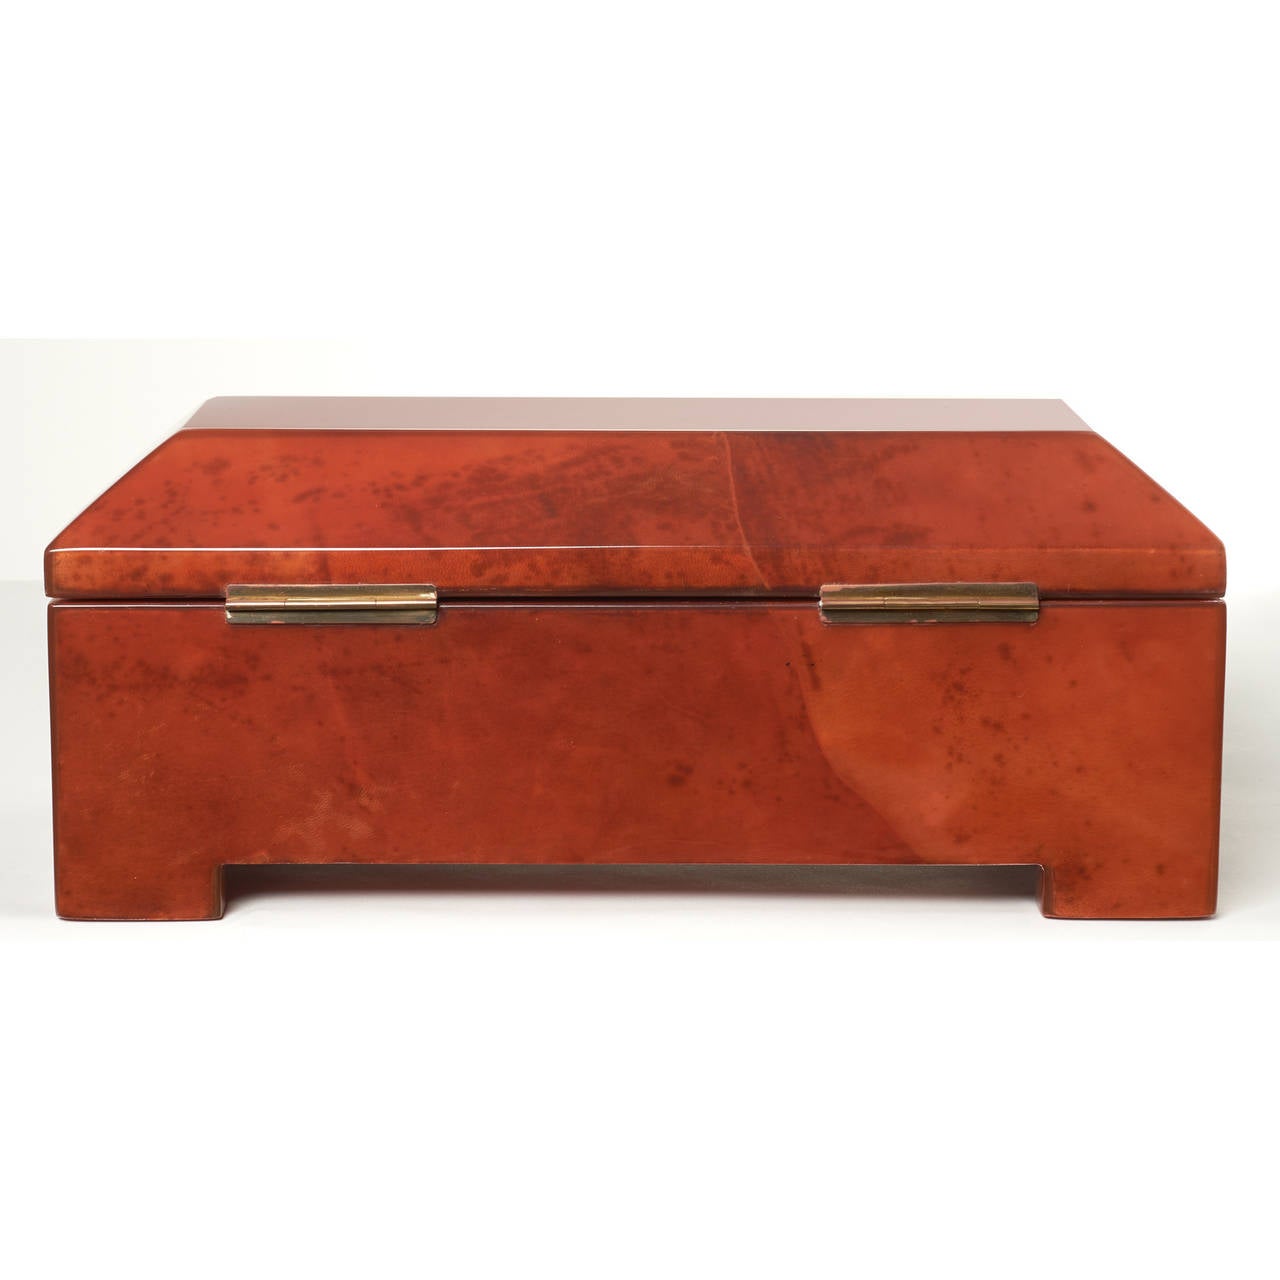 Dyed Blood Red Parchment Wrapped Casket Jewelry Box by Maitland-Smith